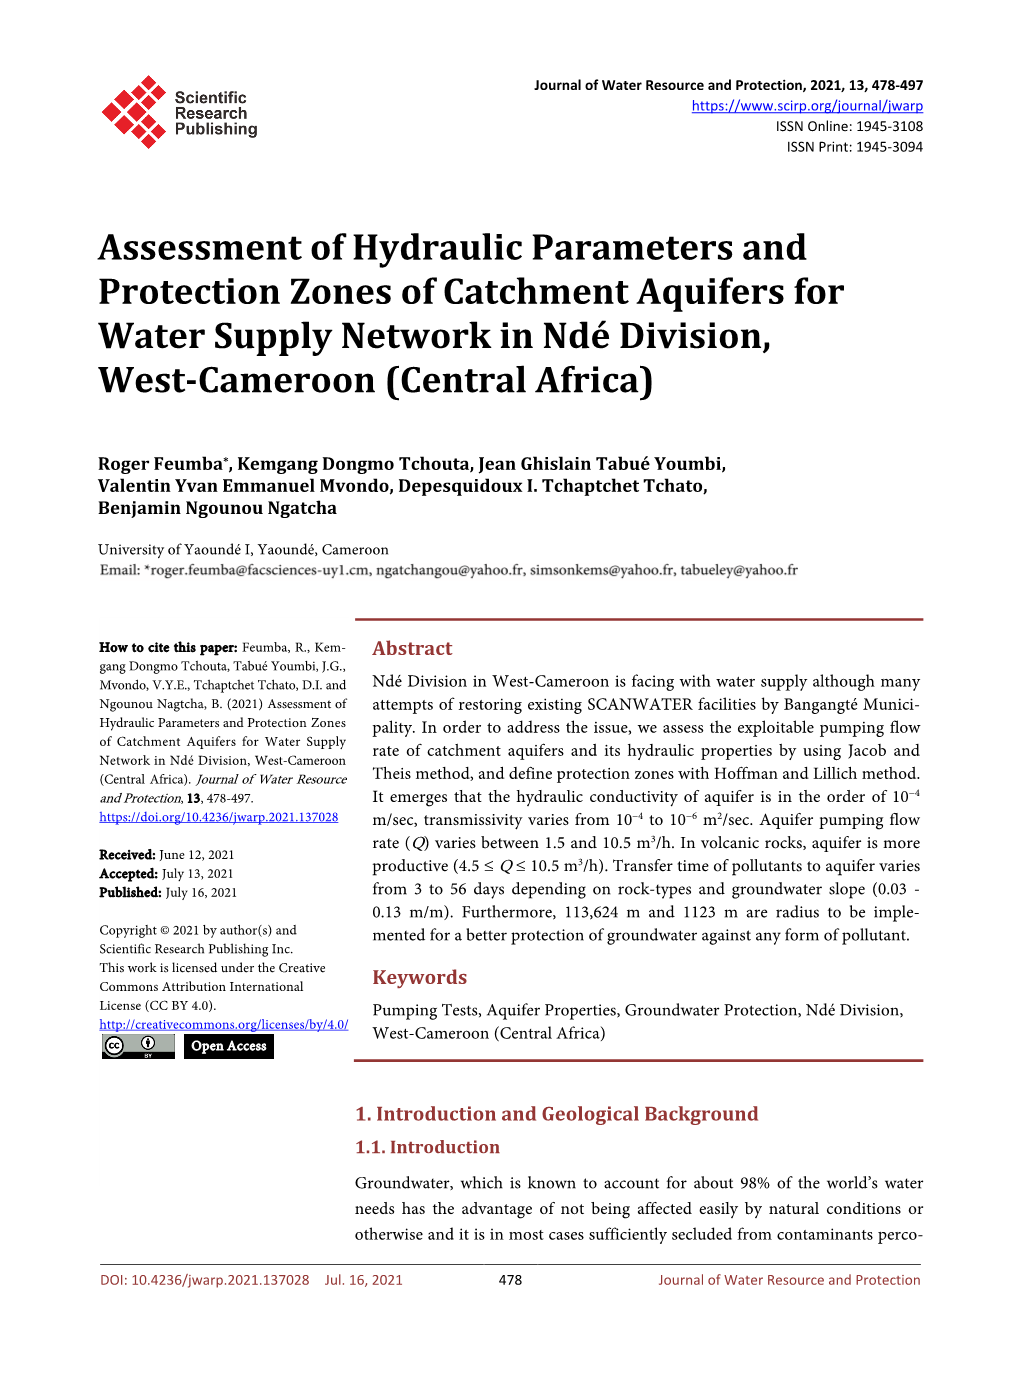 Assessment of Hydraulic Parameters and Protection Zones of Catchment Aquifers for Water Supply Network in Ndé Division, West-Cameroon (Central Africa)